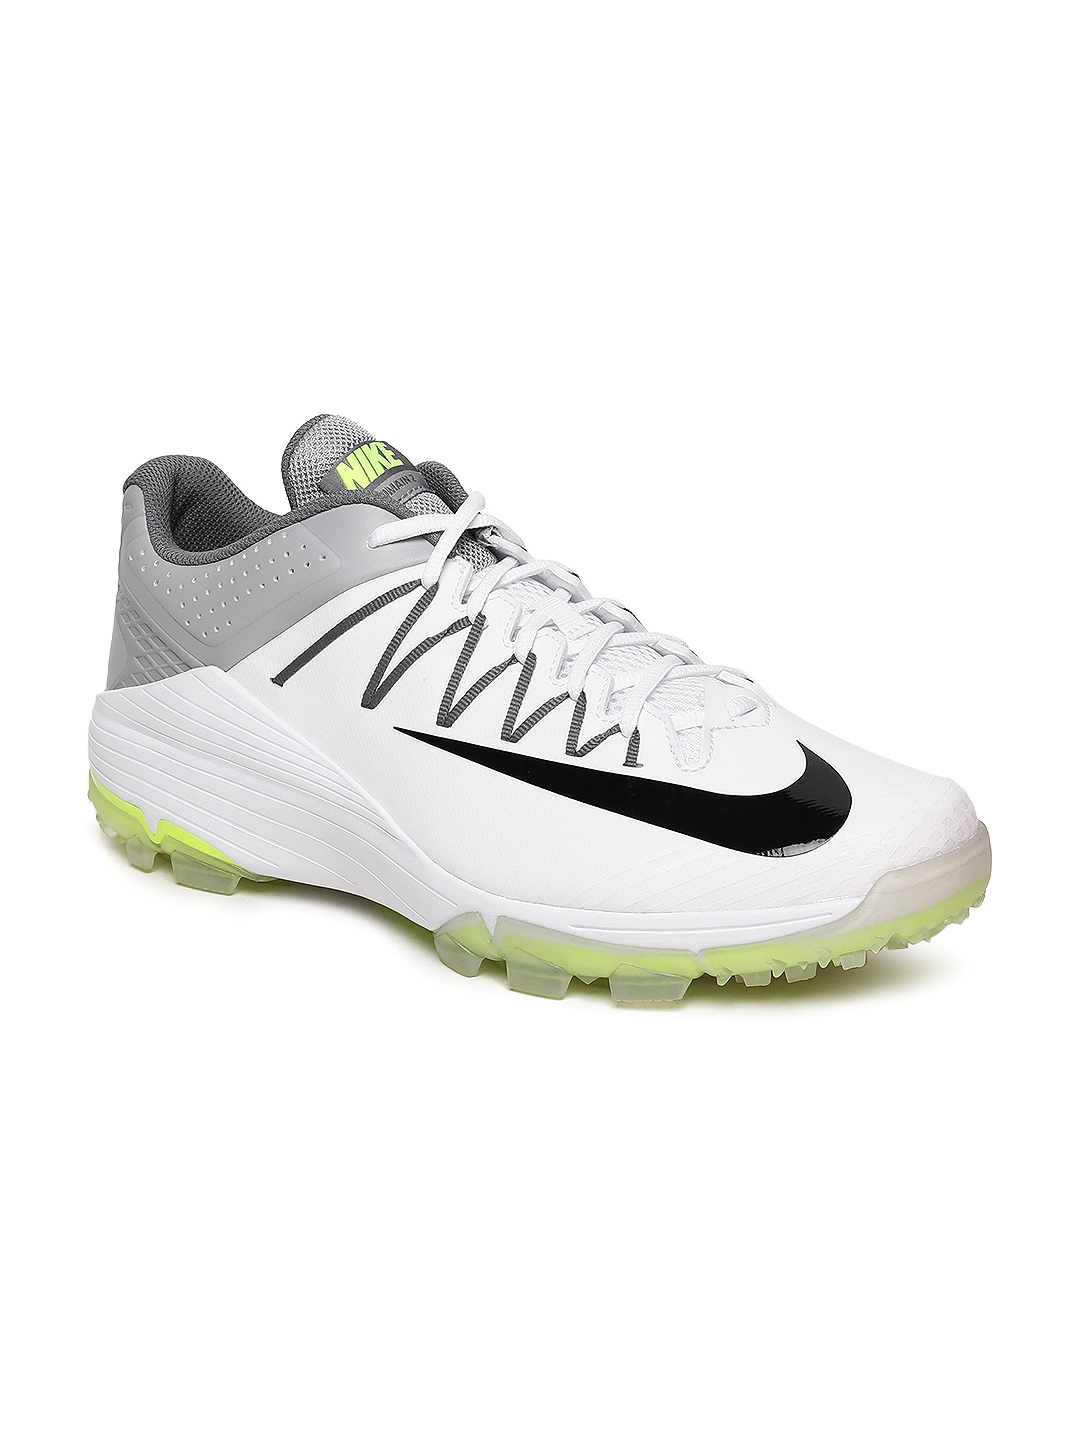 new nike cricket shoes